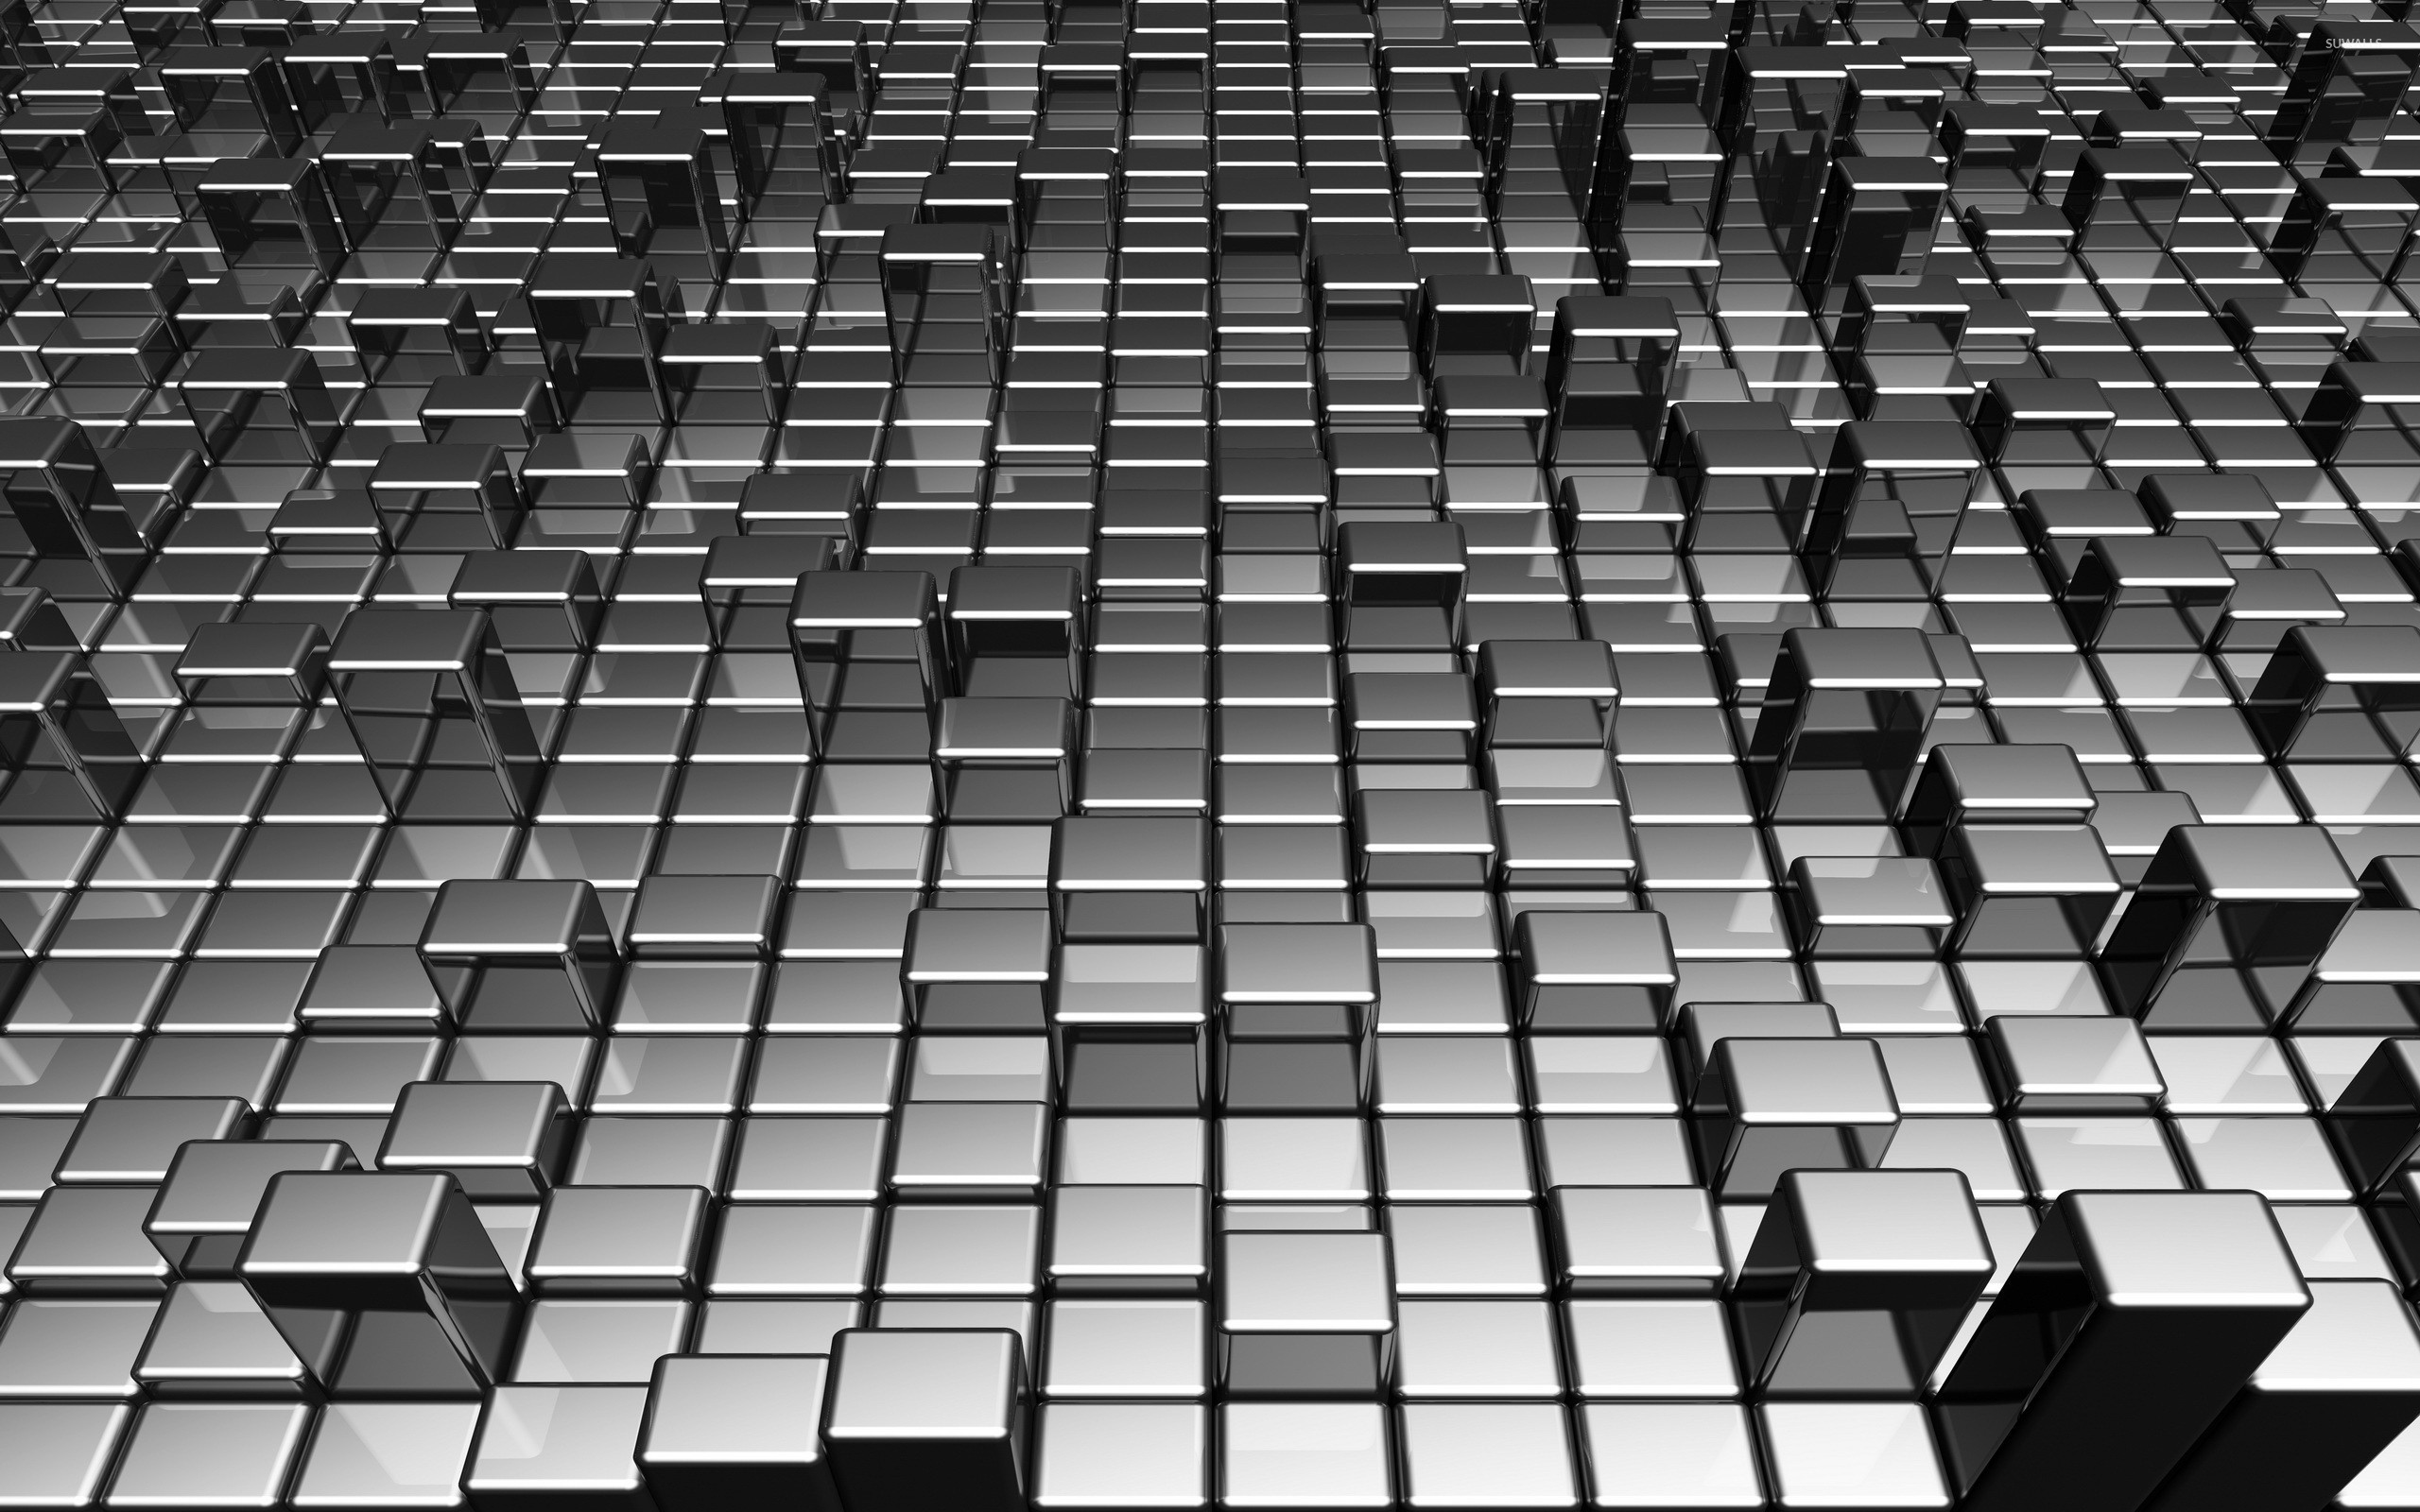 2560x1600 Black and White Cube Wallpaper Awesome Metallic Gray Cubes Wallpaper 3d  Wallpapers